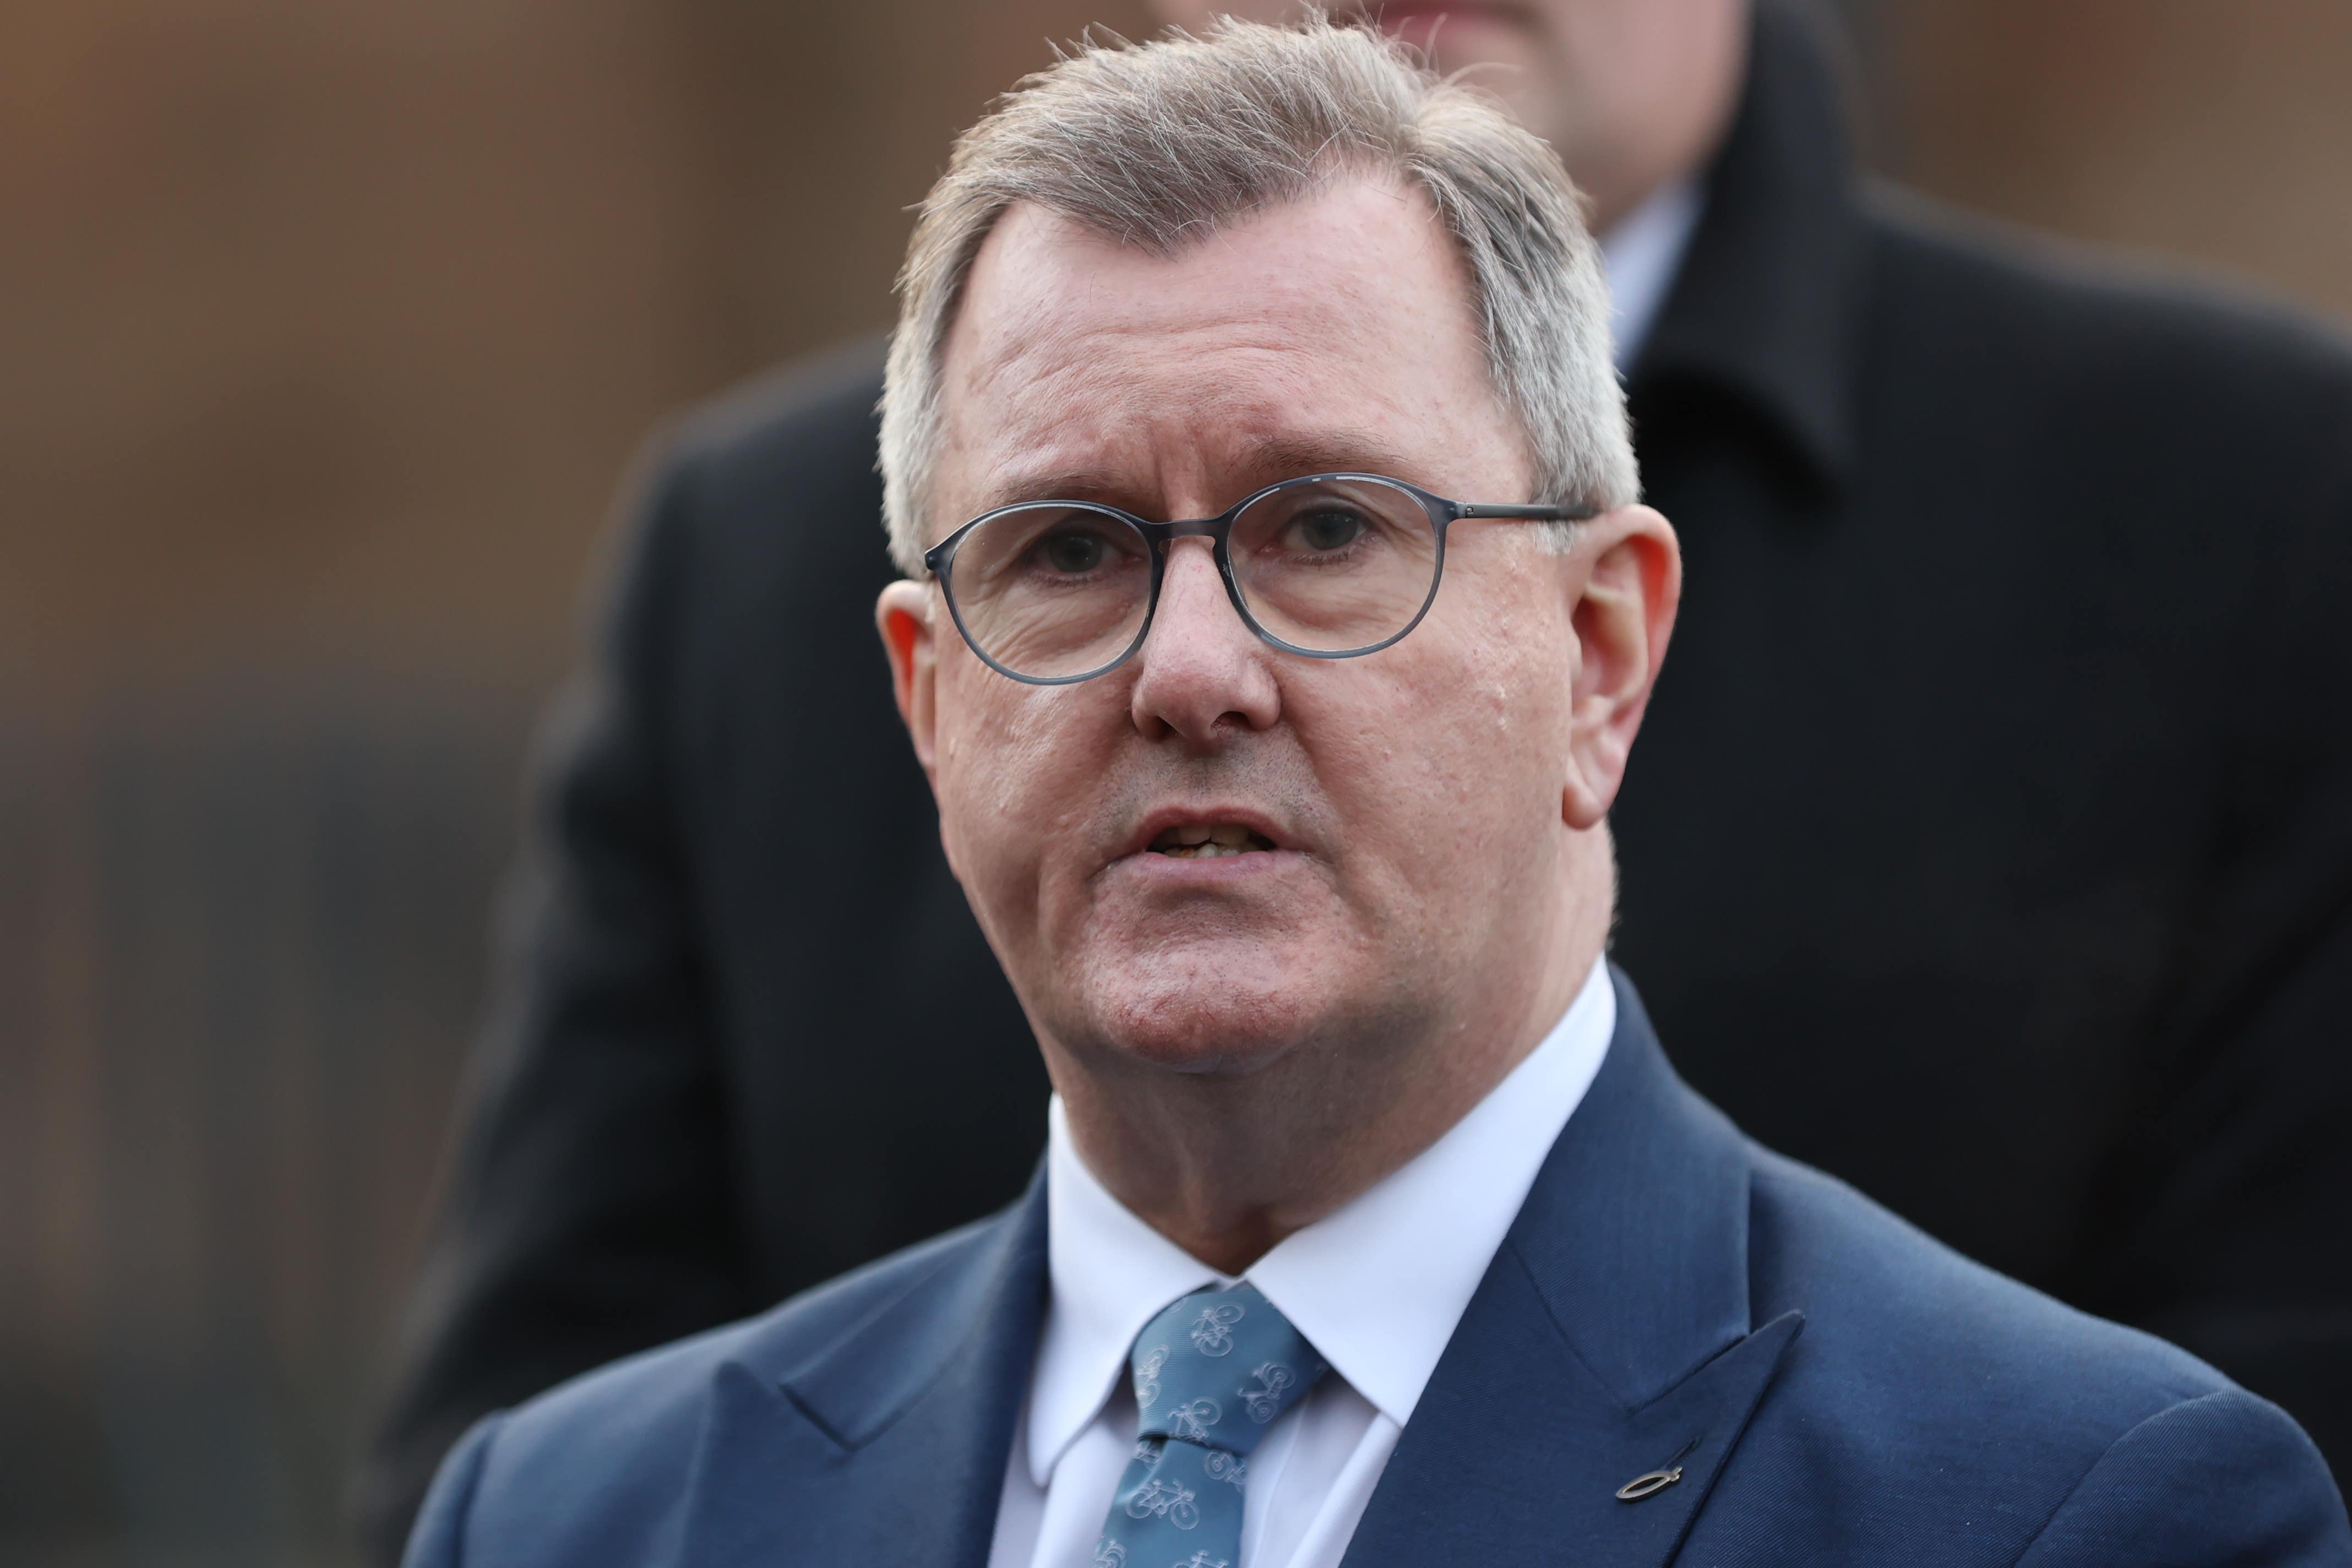 DUP leader Sir Jeffrey Donaldson has said he believes the time is approaching for a decision over negotiations with the Government on post-Brexit trade arrangements (Liam McBurney/PA)